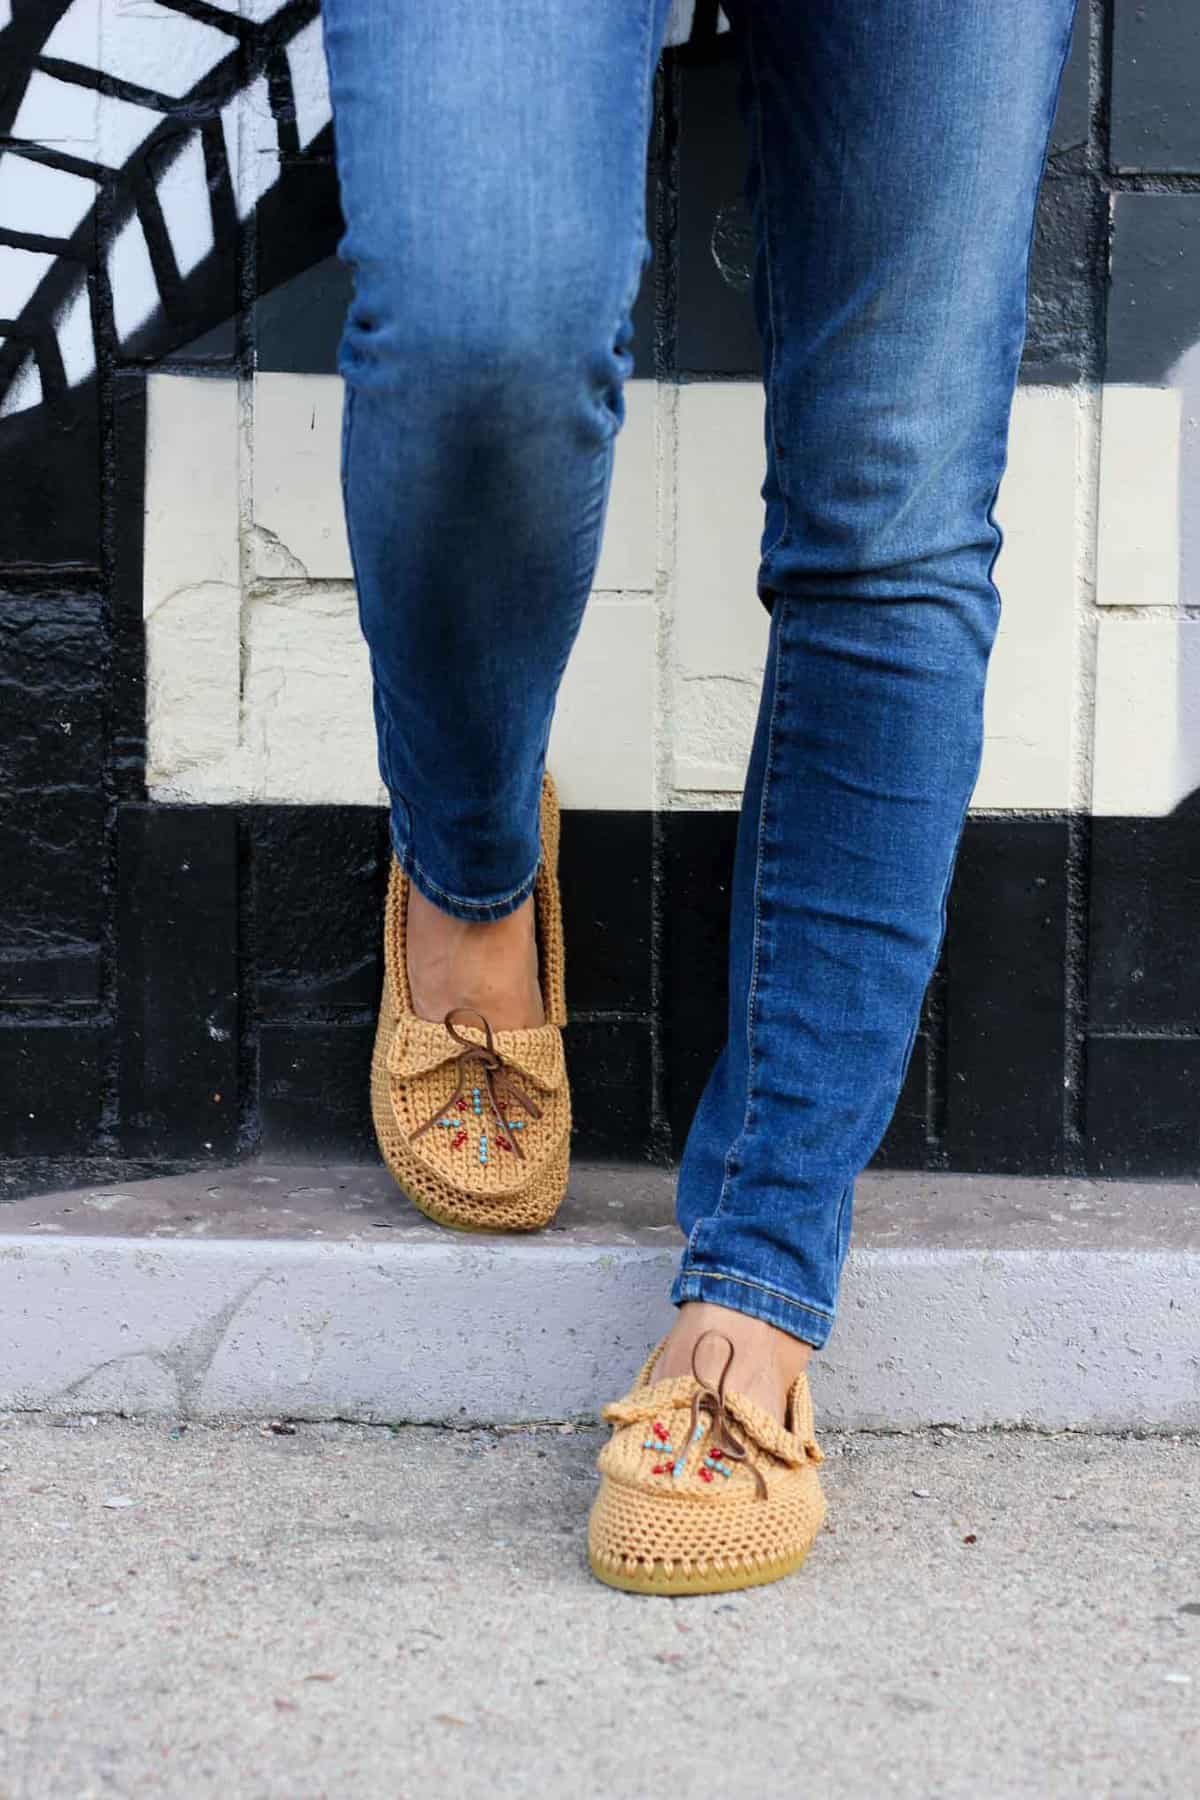 Learn how to crochet shoes with flip flop soles with this free crochet moccasin pattern and video tutorial! These crochet moccasins make super comfortable women's shoes or slippers and can be customized however you wish. Made from Lion Brand 24/7 Cotton in "Camel" color. Seed beads add the perfect boho touch! 